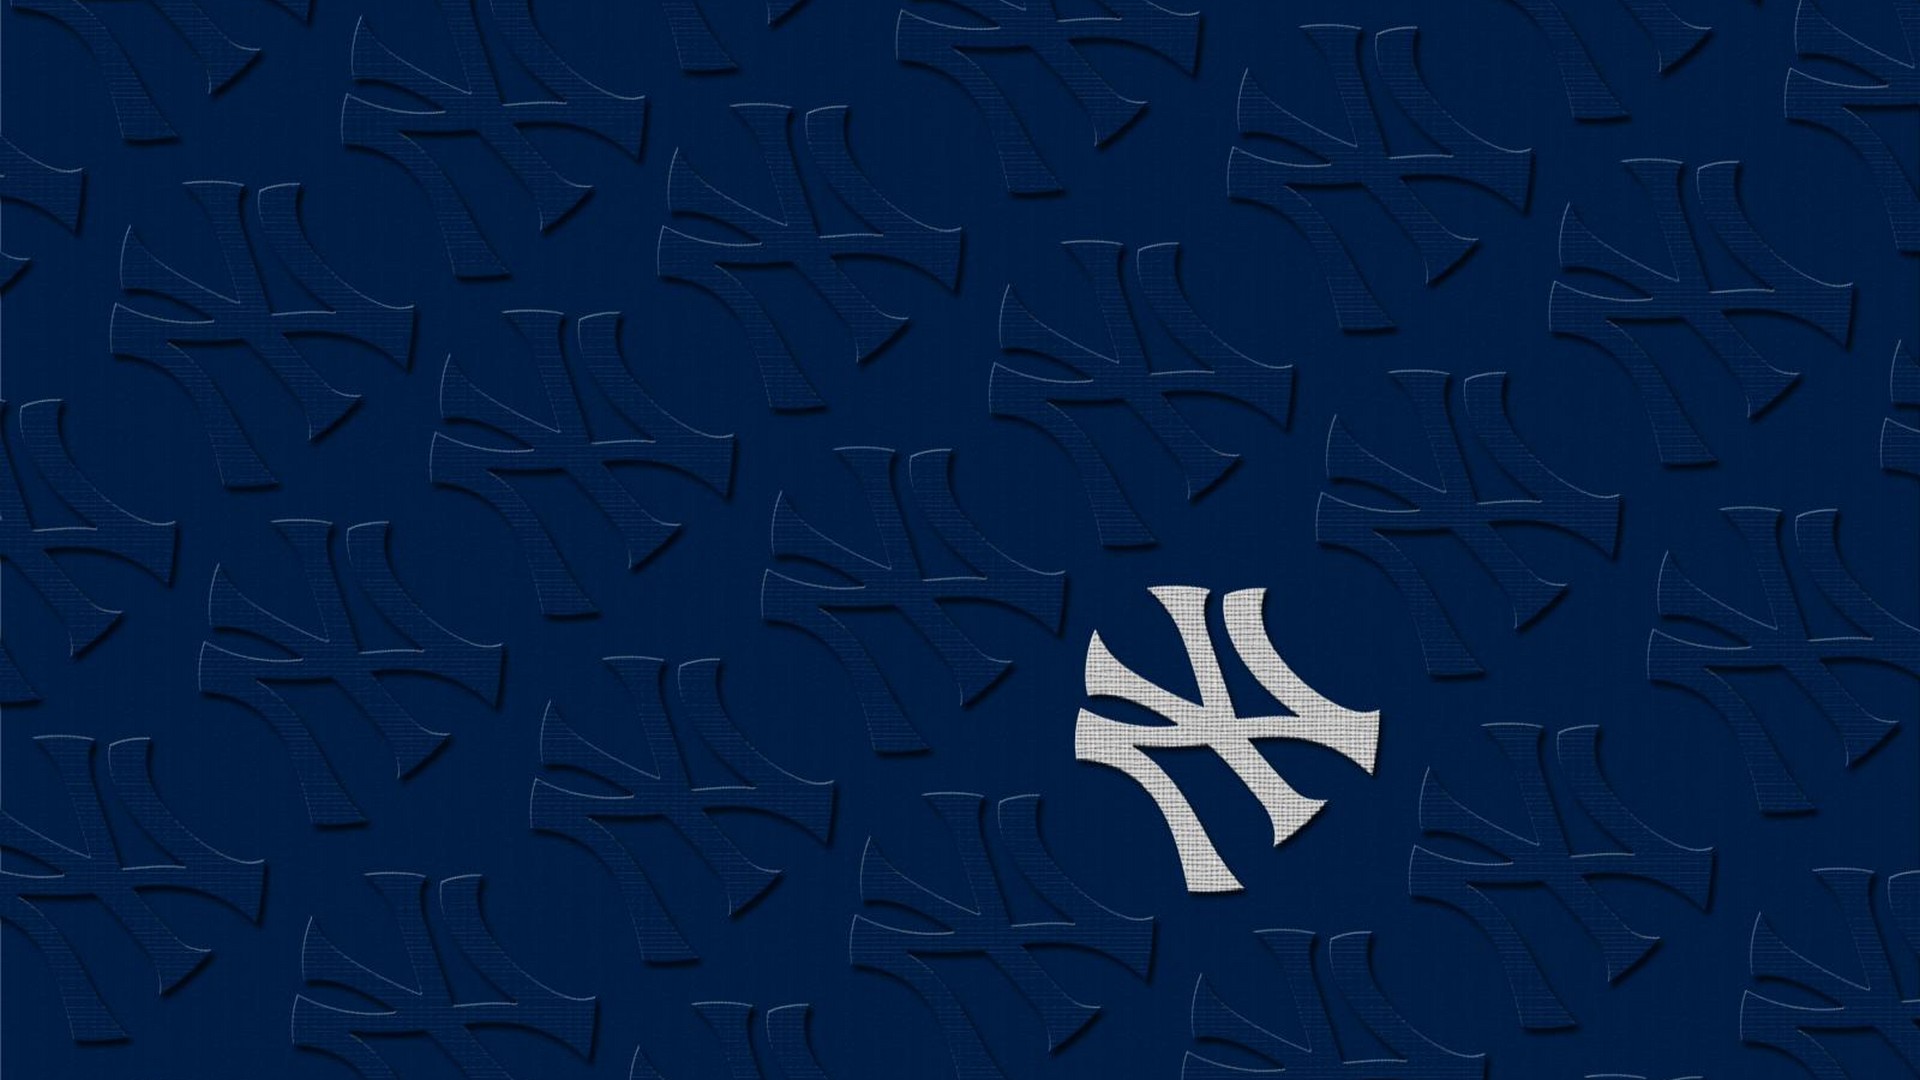 NY Yankees For Desktop Wallpaper with high-resolution 1920x1080 pixel. You can use this wallpaper for Mac Desktop Wallpaper, Laptop Screensavers, Android Wallpapers, Tablet or iPhone Home Screen and another mobile phone device